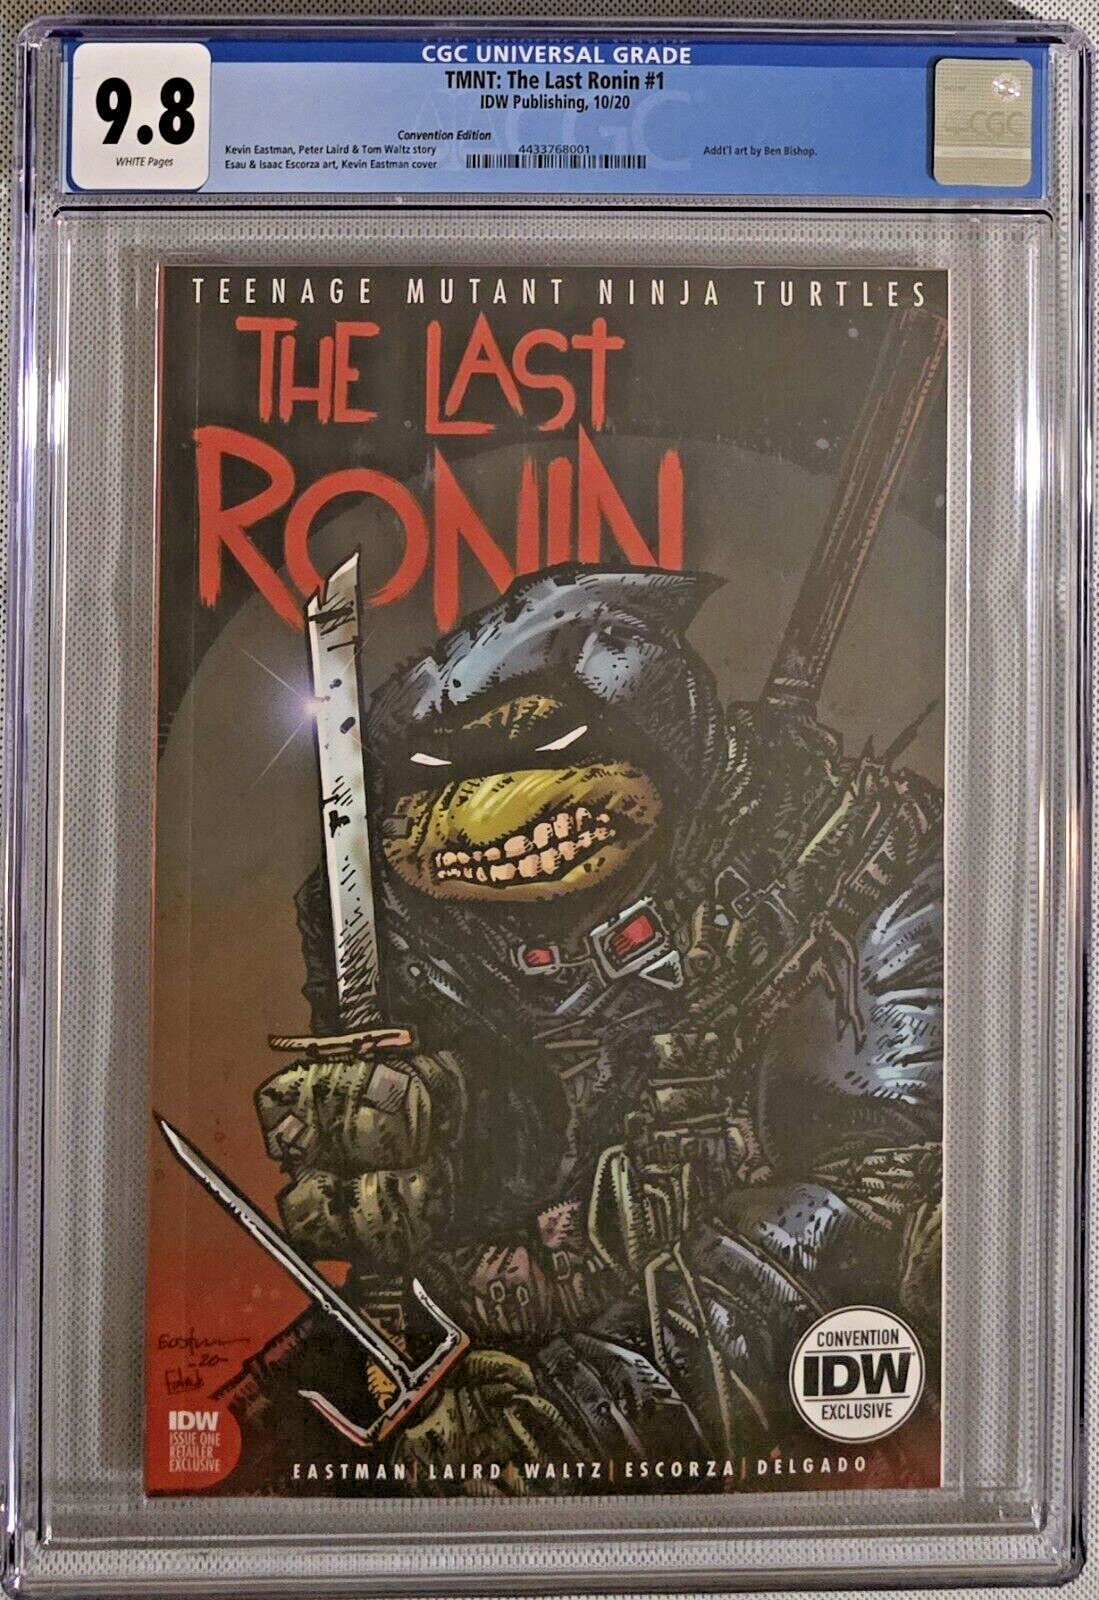 TMNT The Last Ronin #1 CGC 9.8 Convention Edition Eastman NYCC Exclusive Variant